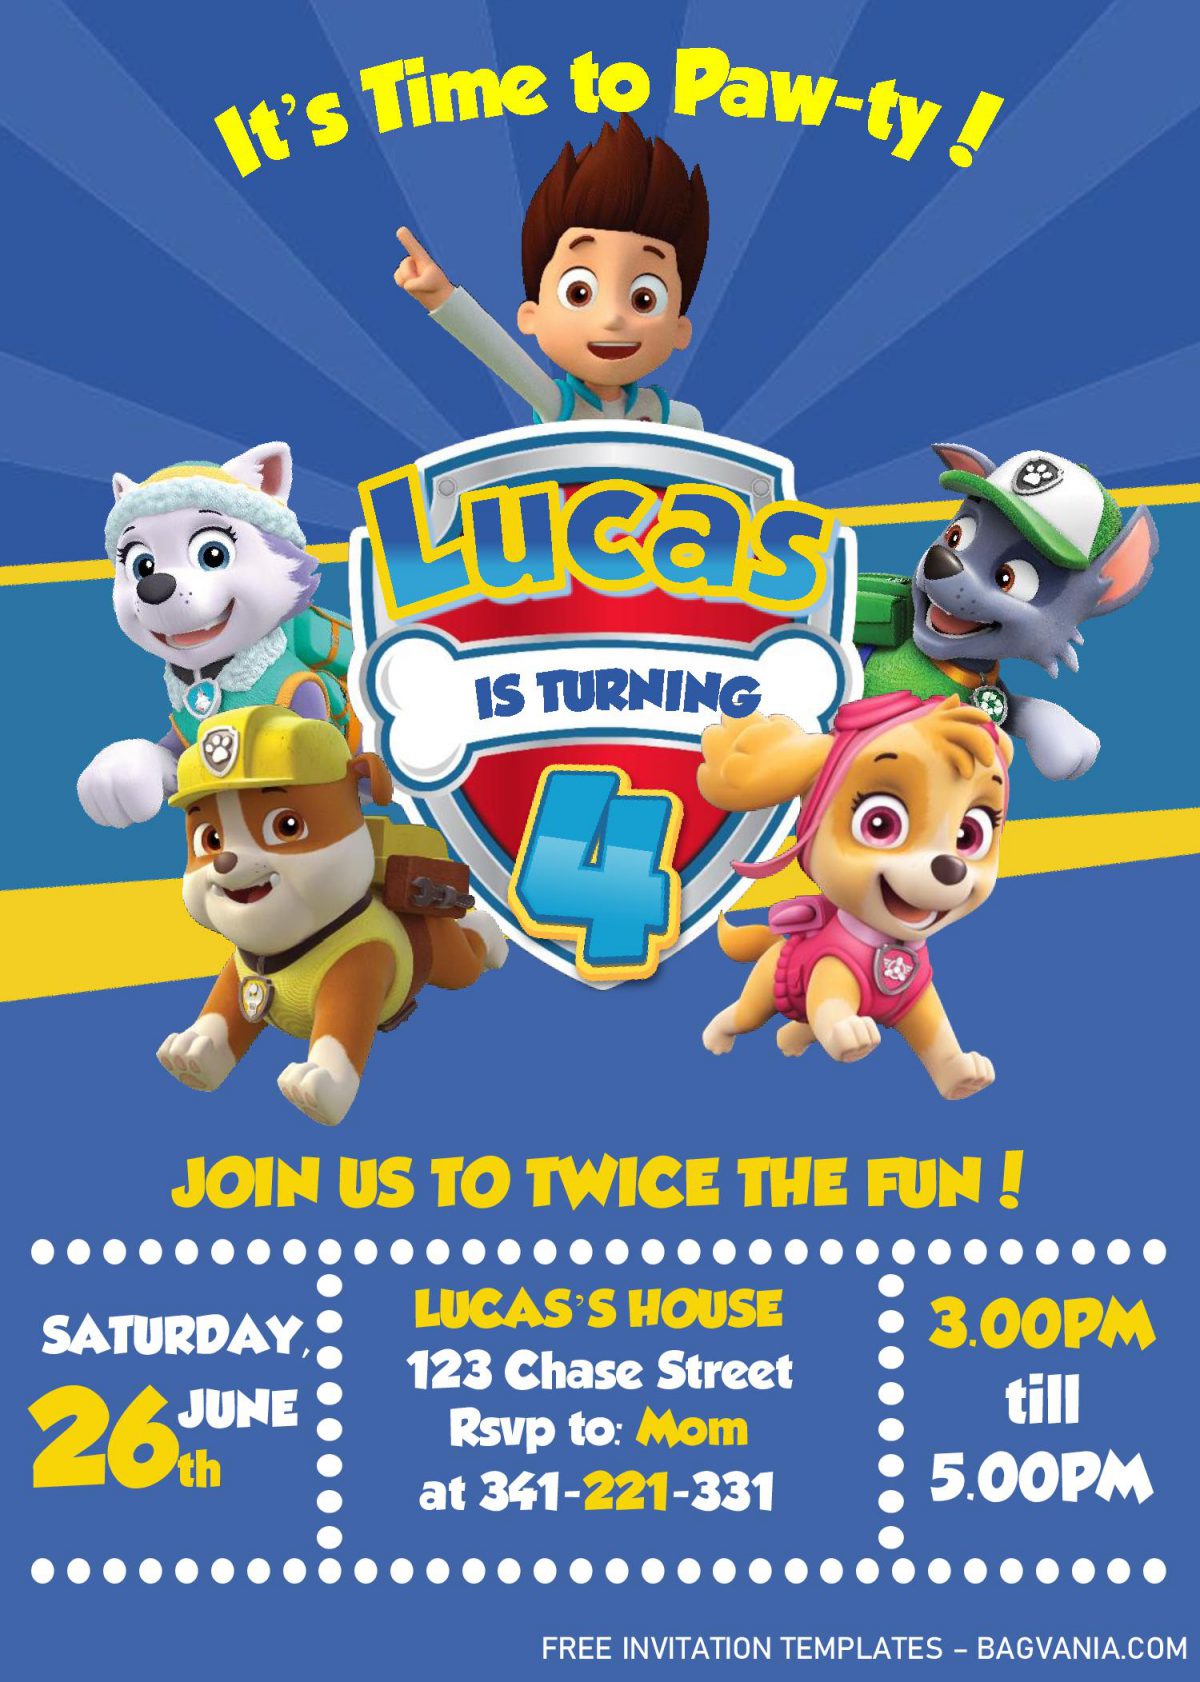 Paw Patrol Invitation Templates - Editable With MS Word and has skye and chase